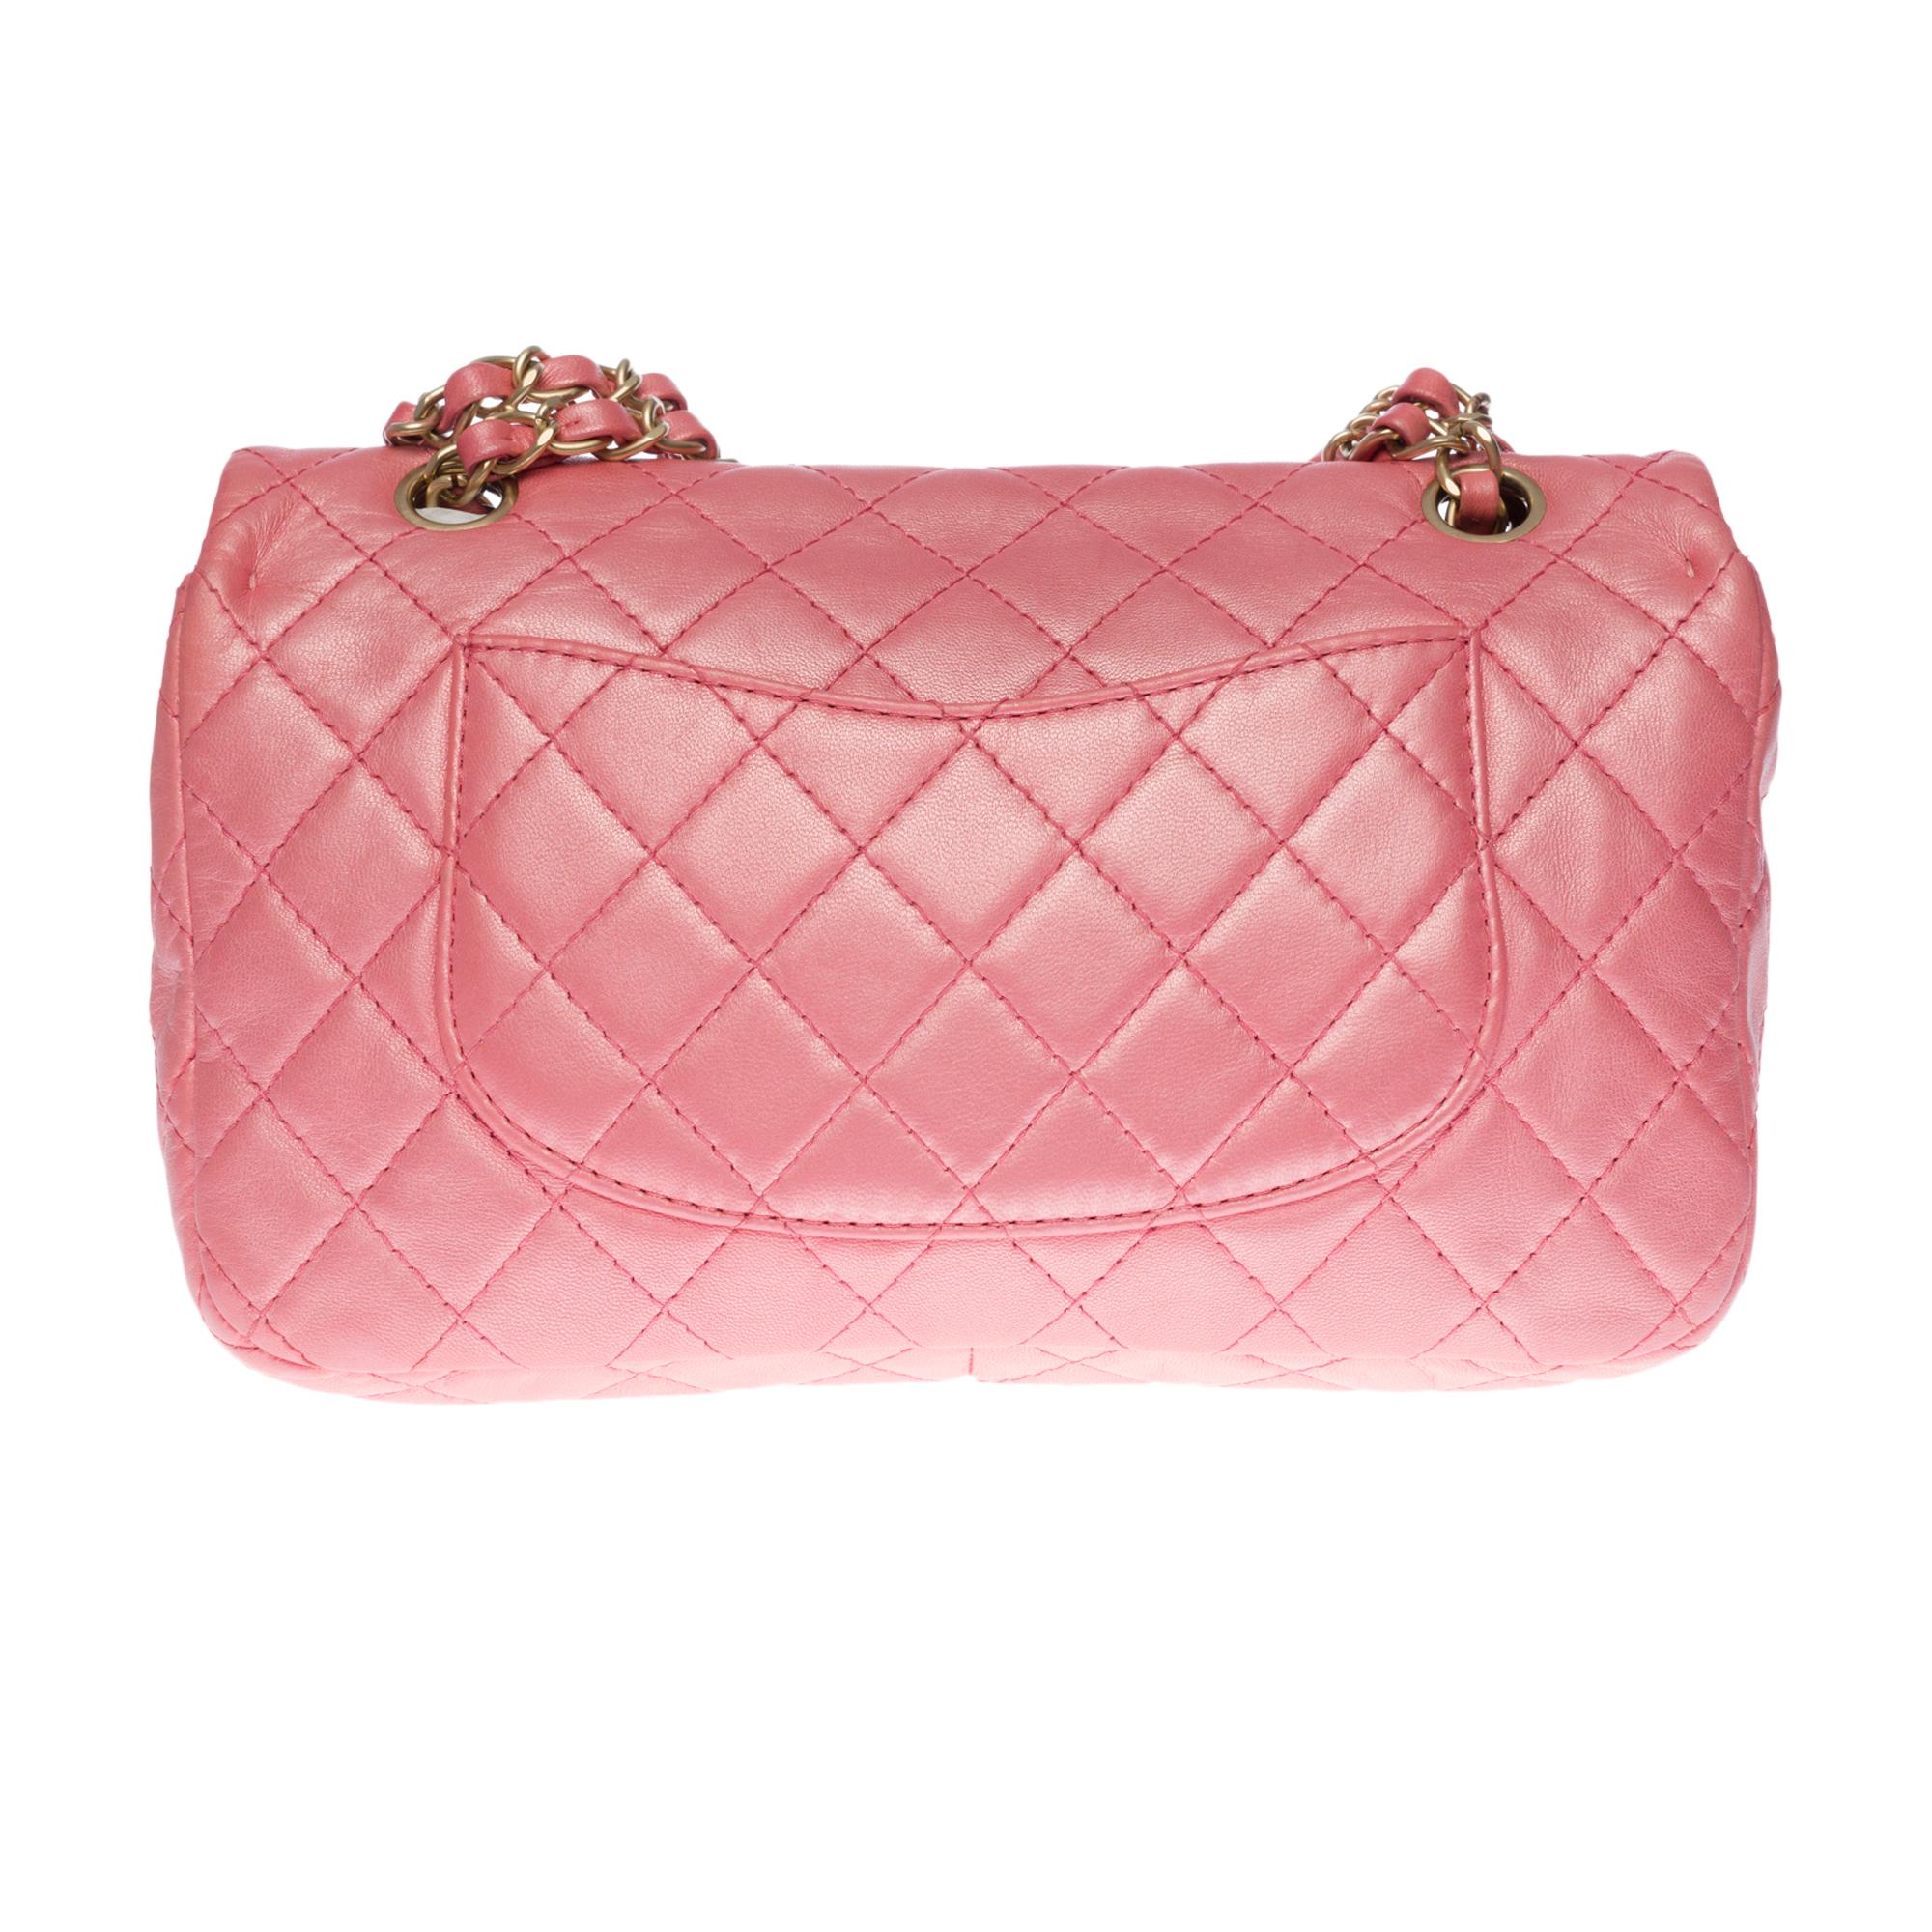 Lovely Chanel Classic Bag Limited edition flap bag in metallic pink quilted leather, matte silver metal hardware, silver metal chain intertwined with pink leather for a hand or shoulder support
Flap closure
Matt silver metal CC with multi-coloured